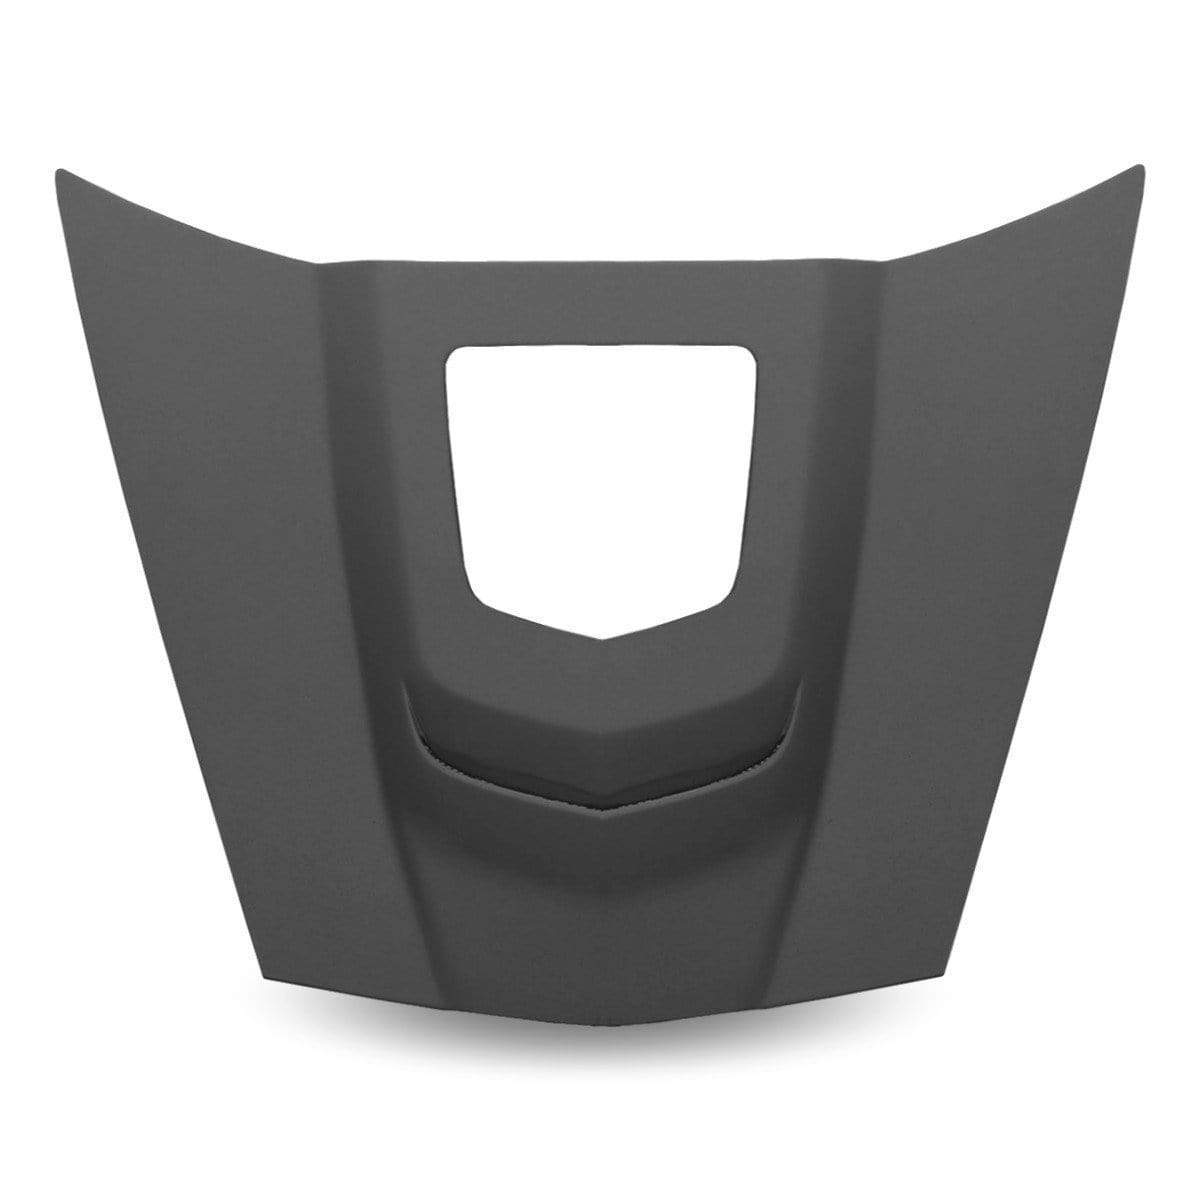 ACS Composite L88 Extractor Hood with Polycarbonate Window for C6 Corvette [27-4-033]PRM[27-4-013] - Lightweight, heat-resistant, and efficient heat extraction.